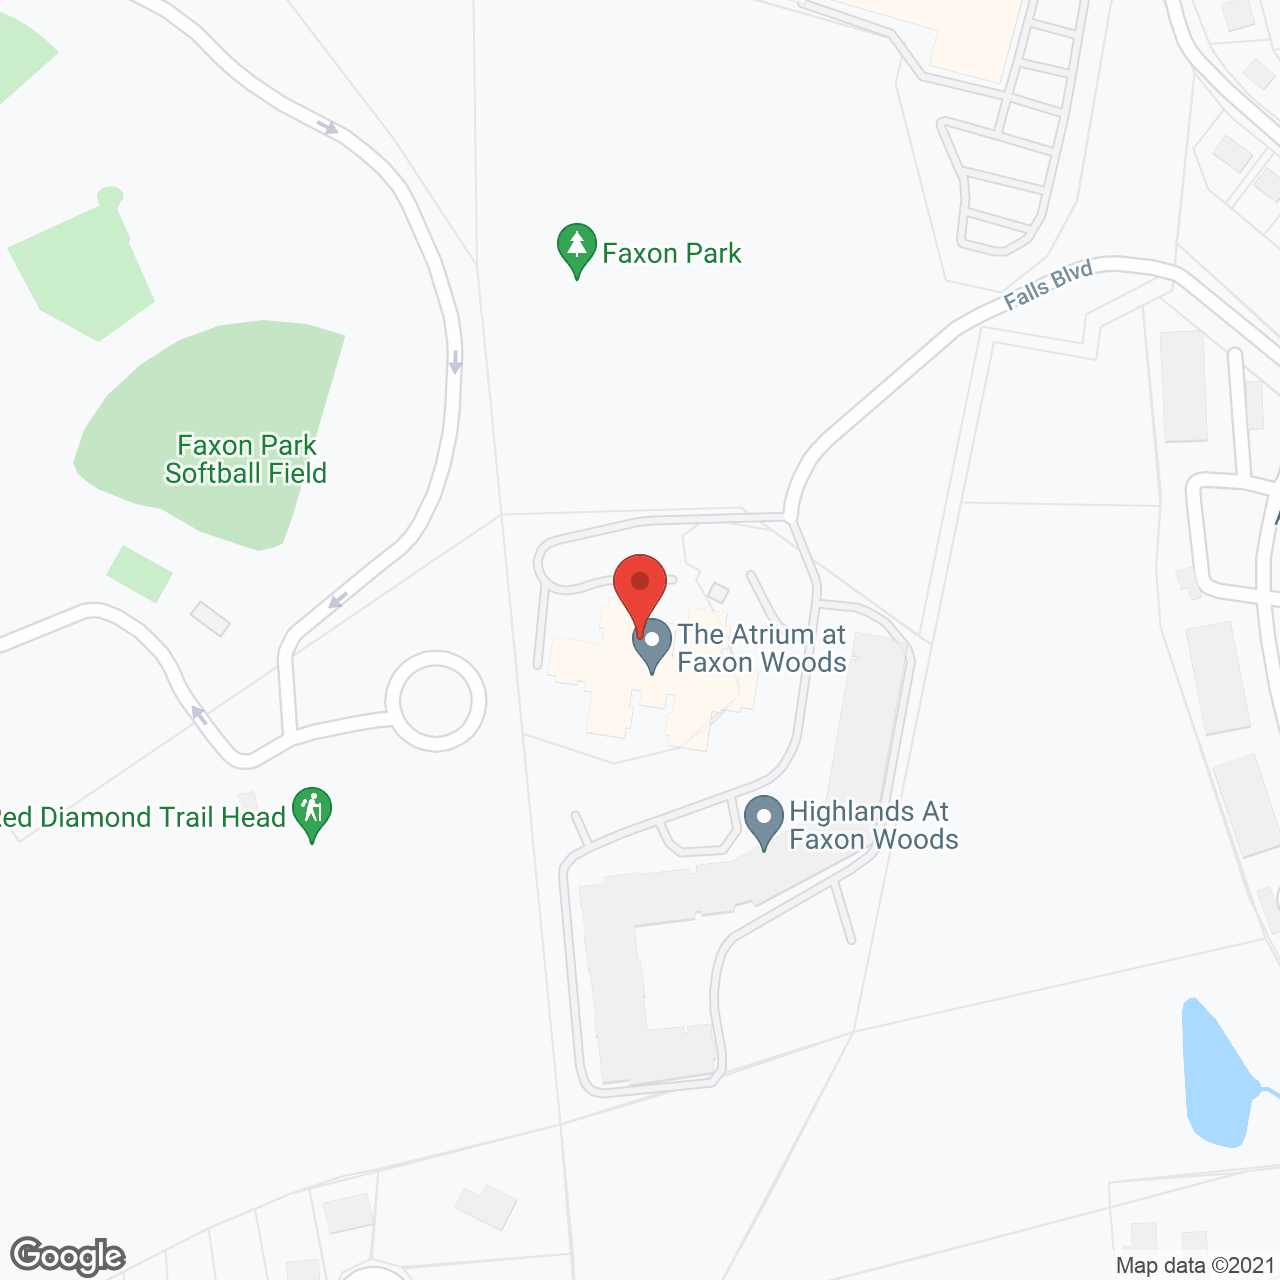 The Atrium at Faxon Woods in google map